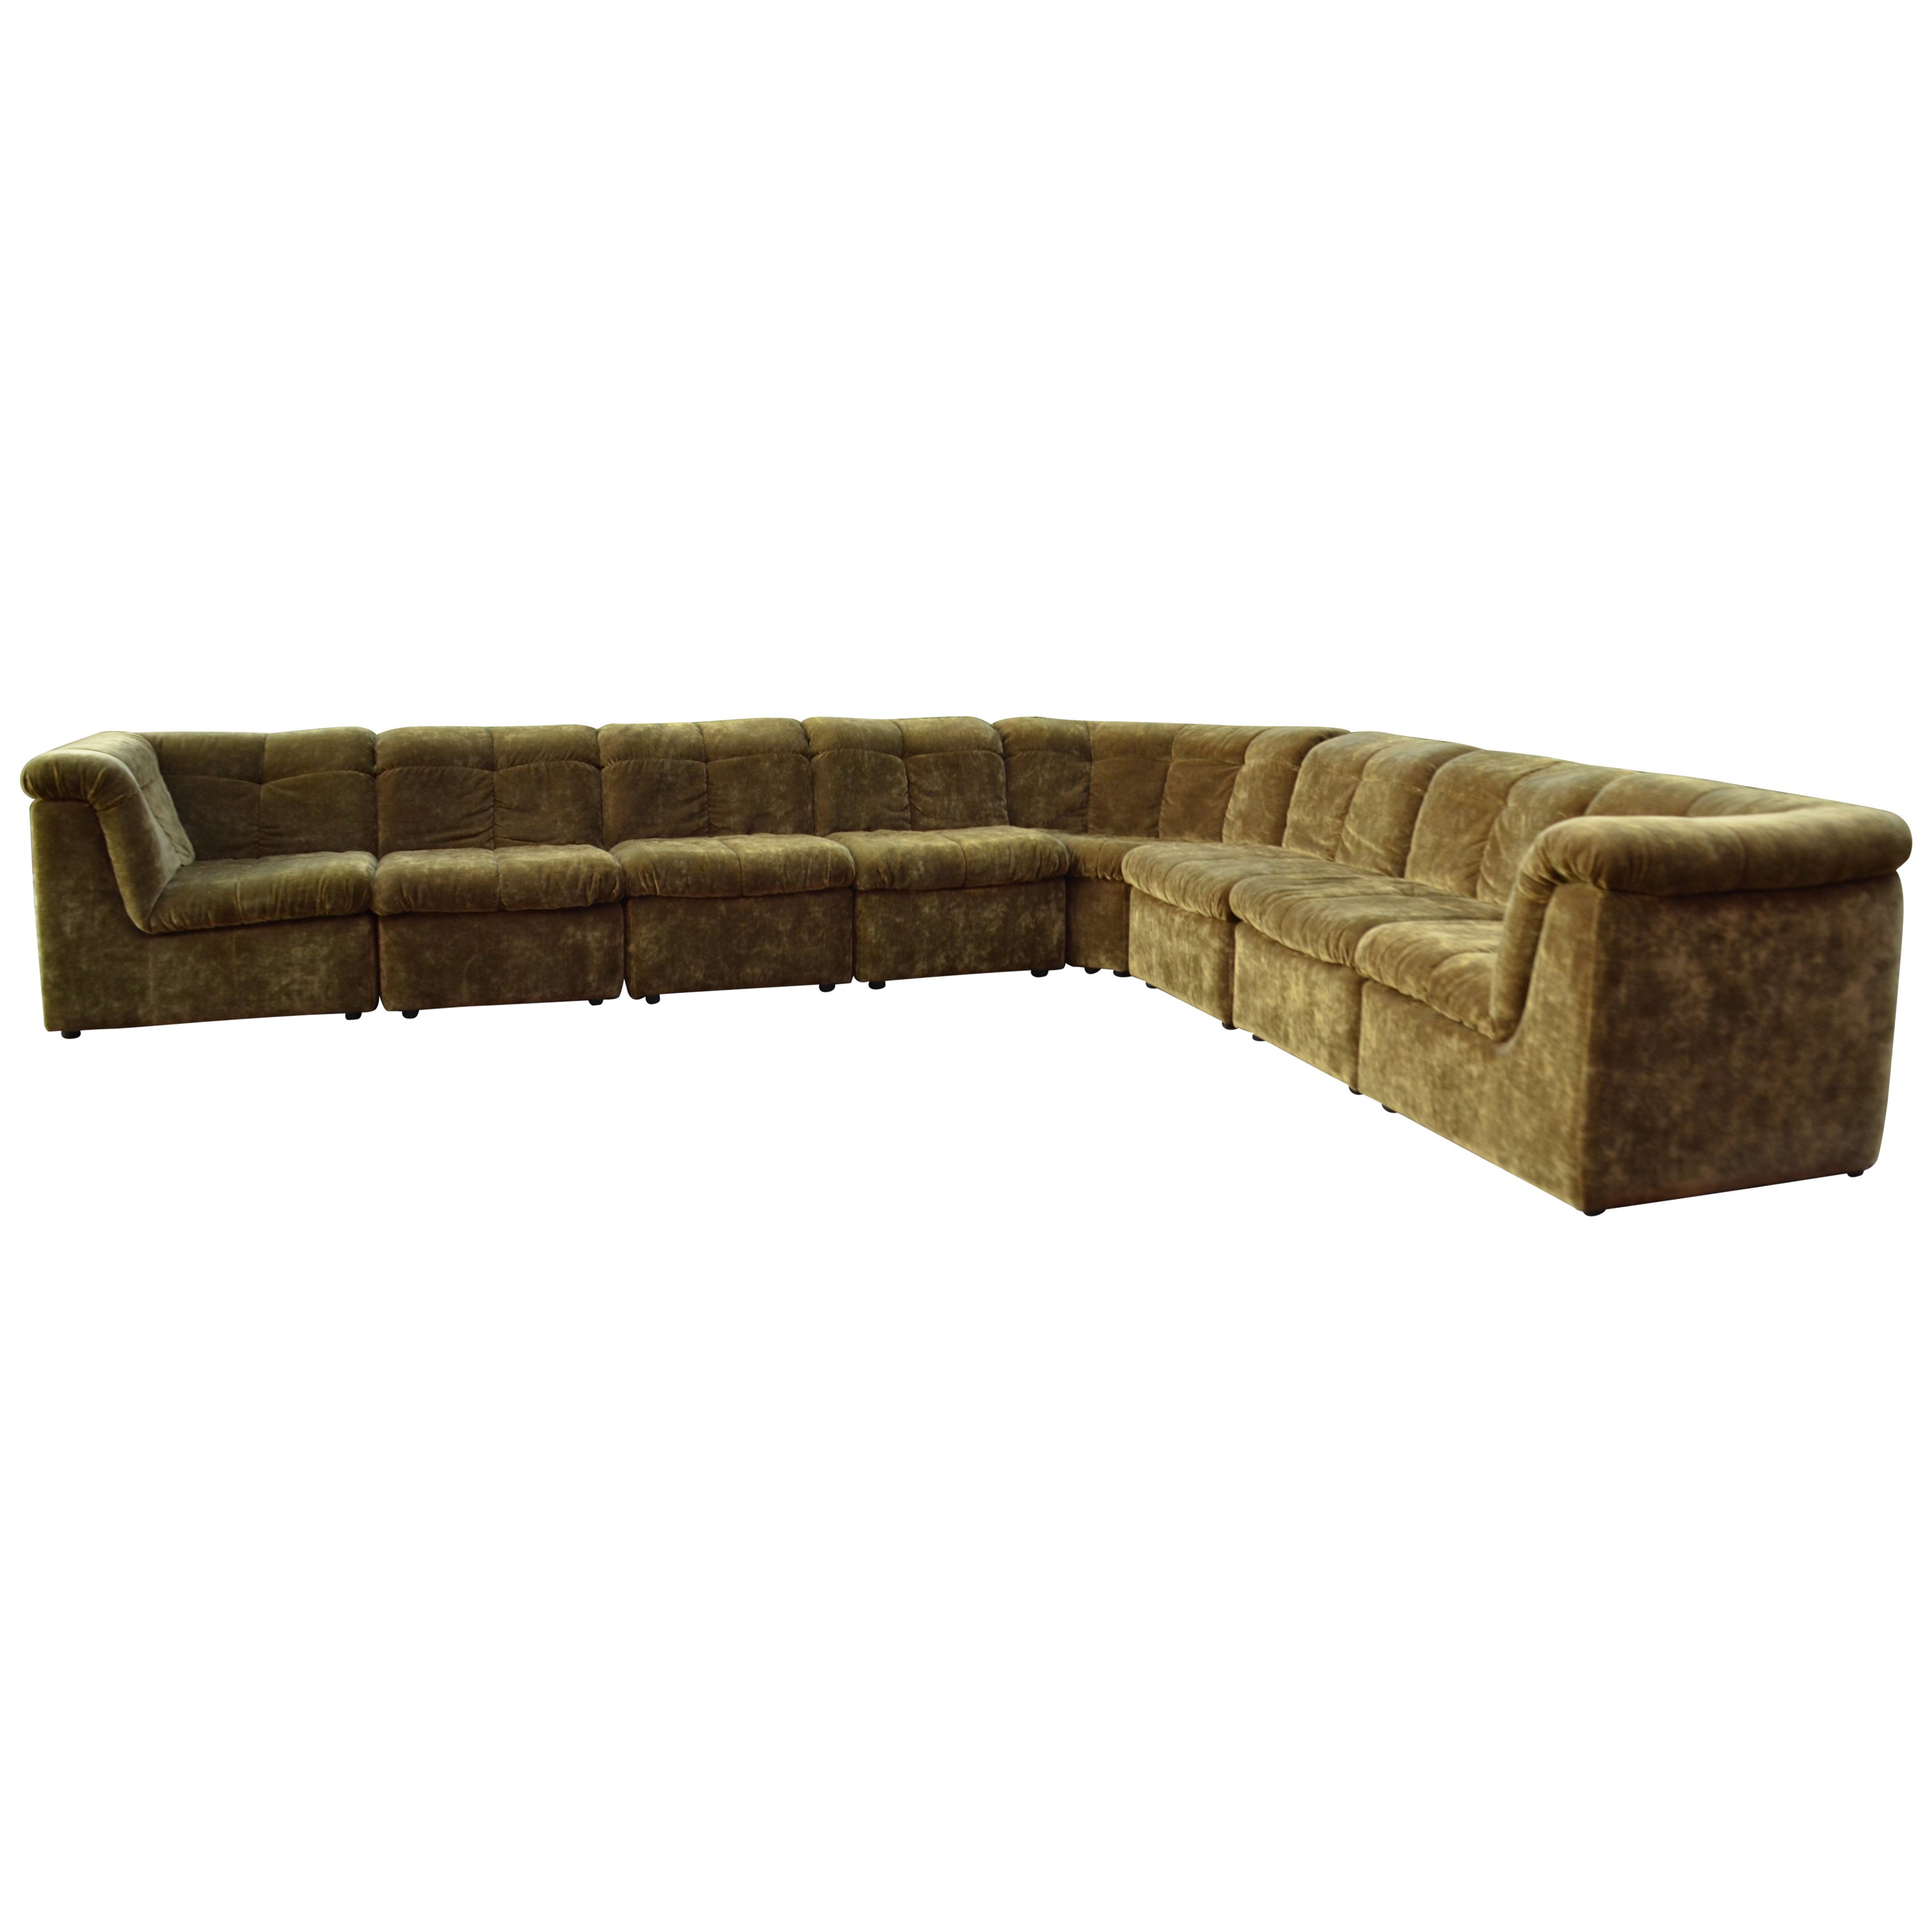 Vintage 1970s modular sofa from Germany.
The fabric is a moss green mohair in very good condition.
Great seating comfort.

It consists 8 elements.
5 Seating elements
2 corner/ end elemnts
1 round element

Each element is made completely of